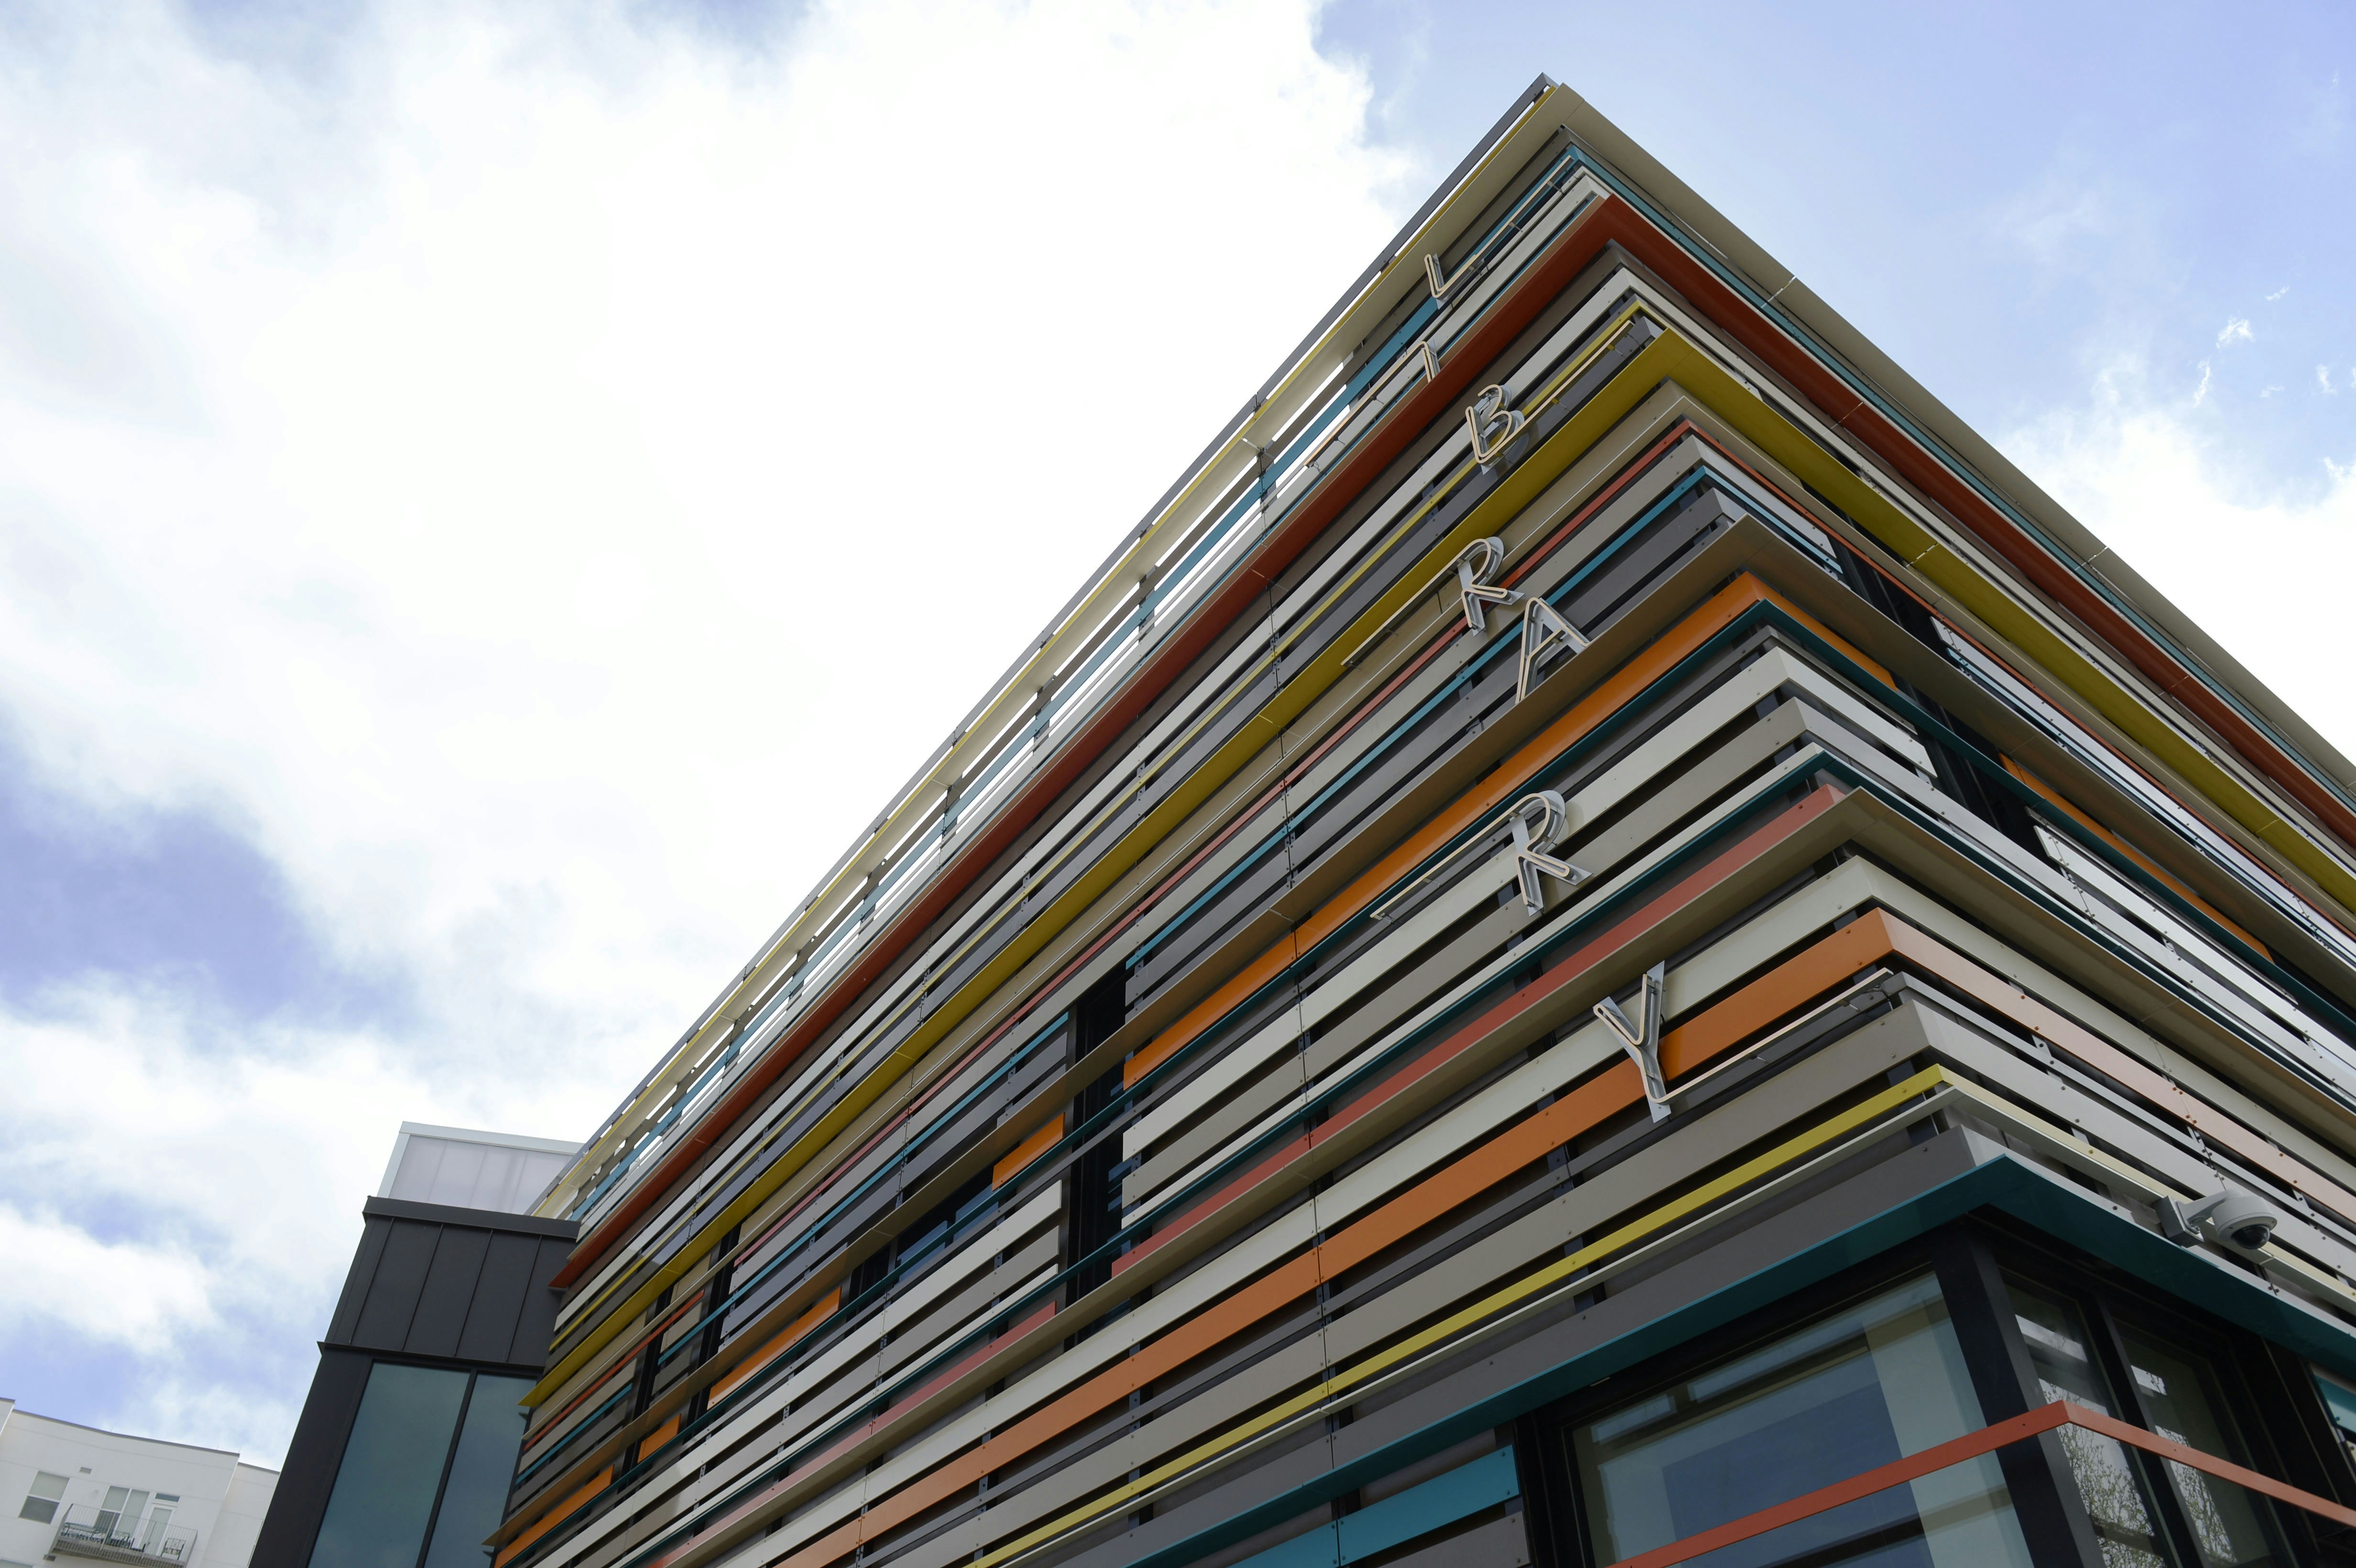 The colourful facade of the Rodolfo "Corky" Gonzales Branch of Denver Library April 15, 2015. (Photo by Andy Cross/The Denver Post via Getty Images)